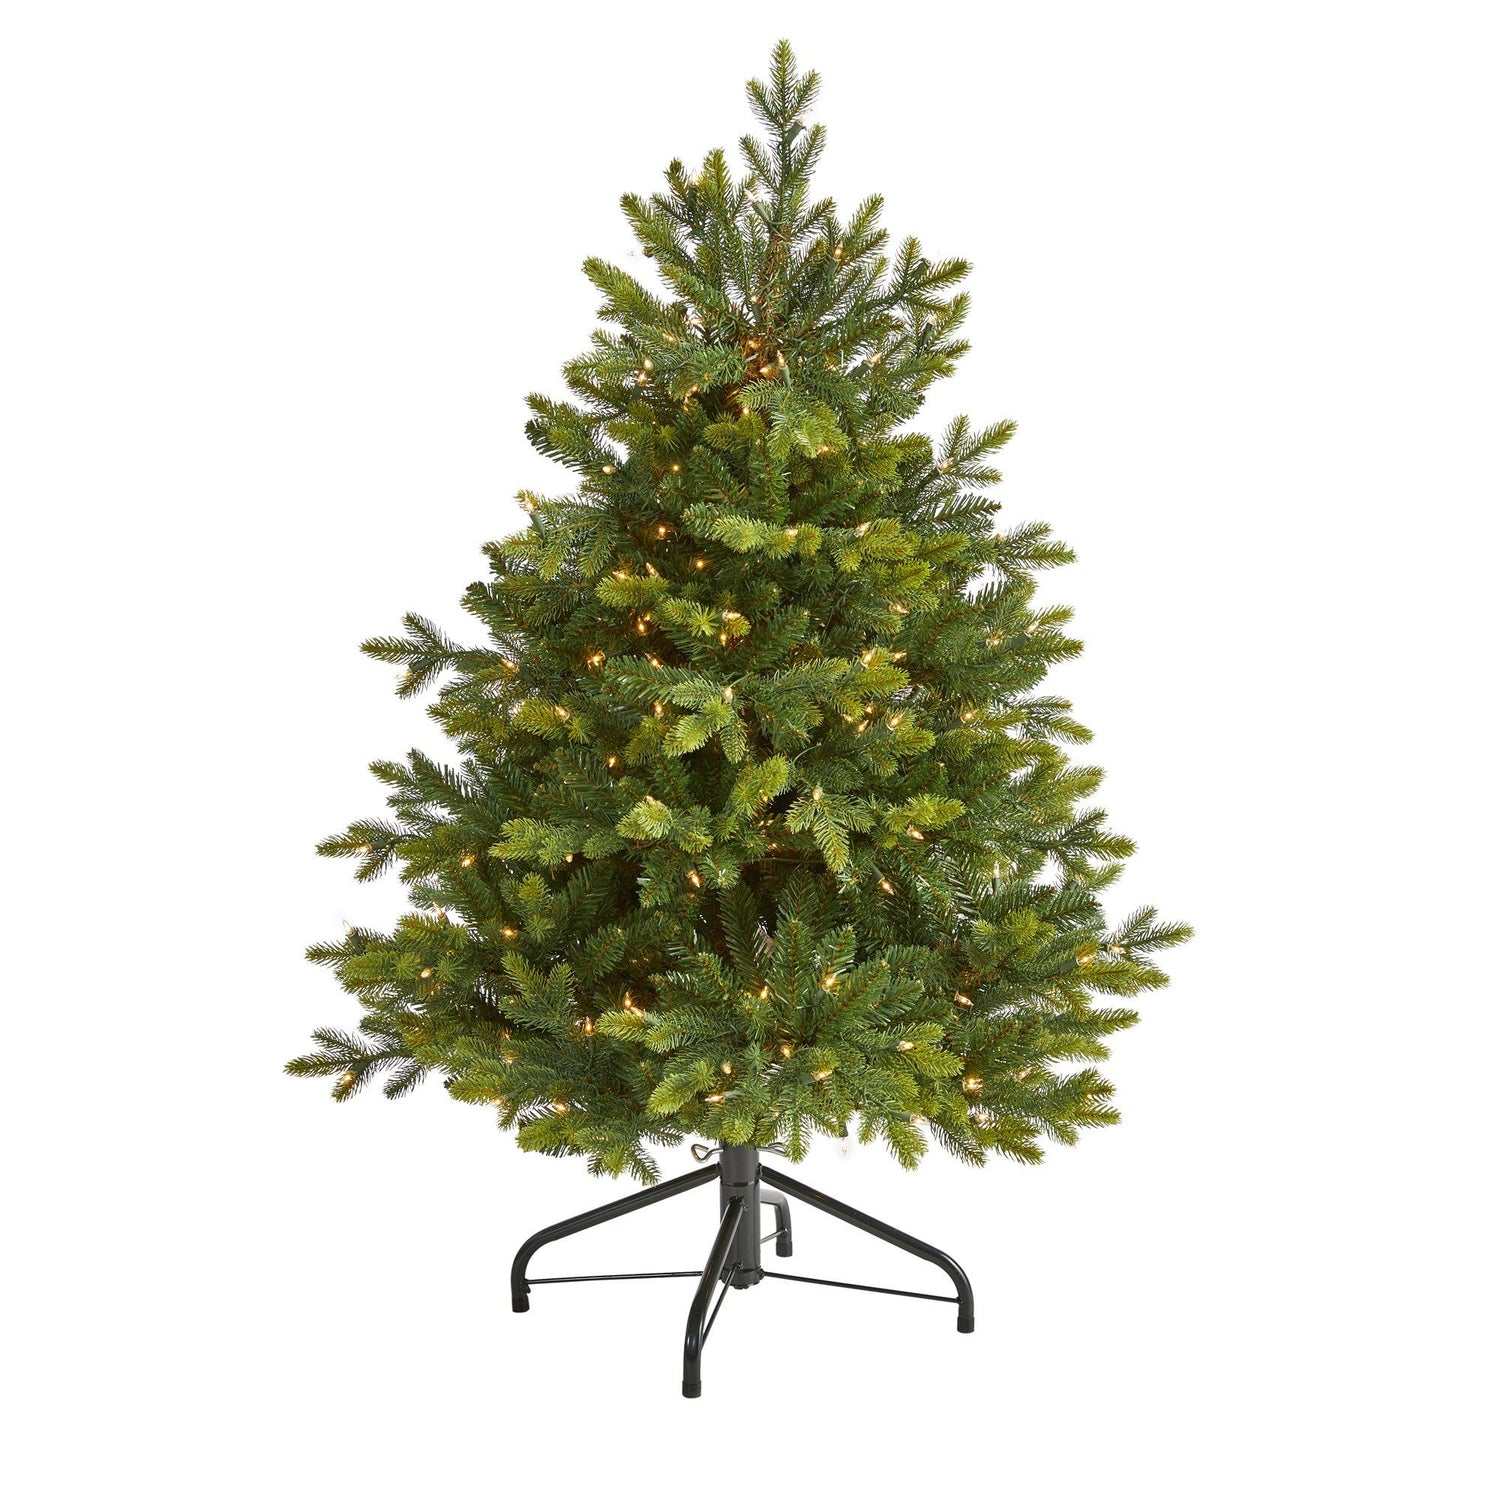 4’ North Carolina Fir Artificial Christmas Tree with 250 Clear Lights and 1003 Bendable Branches